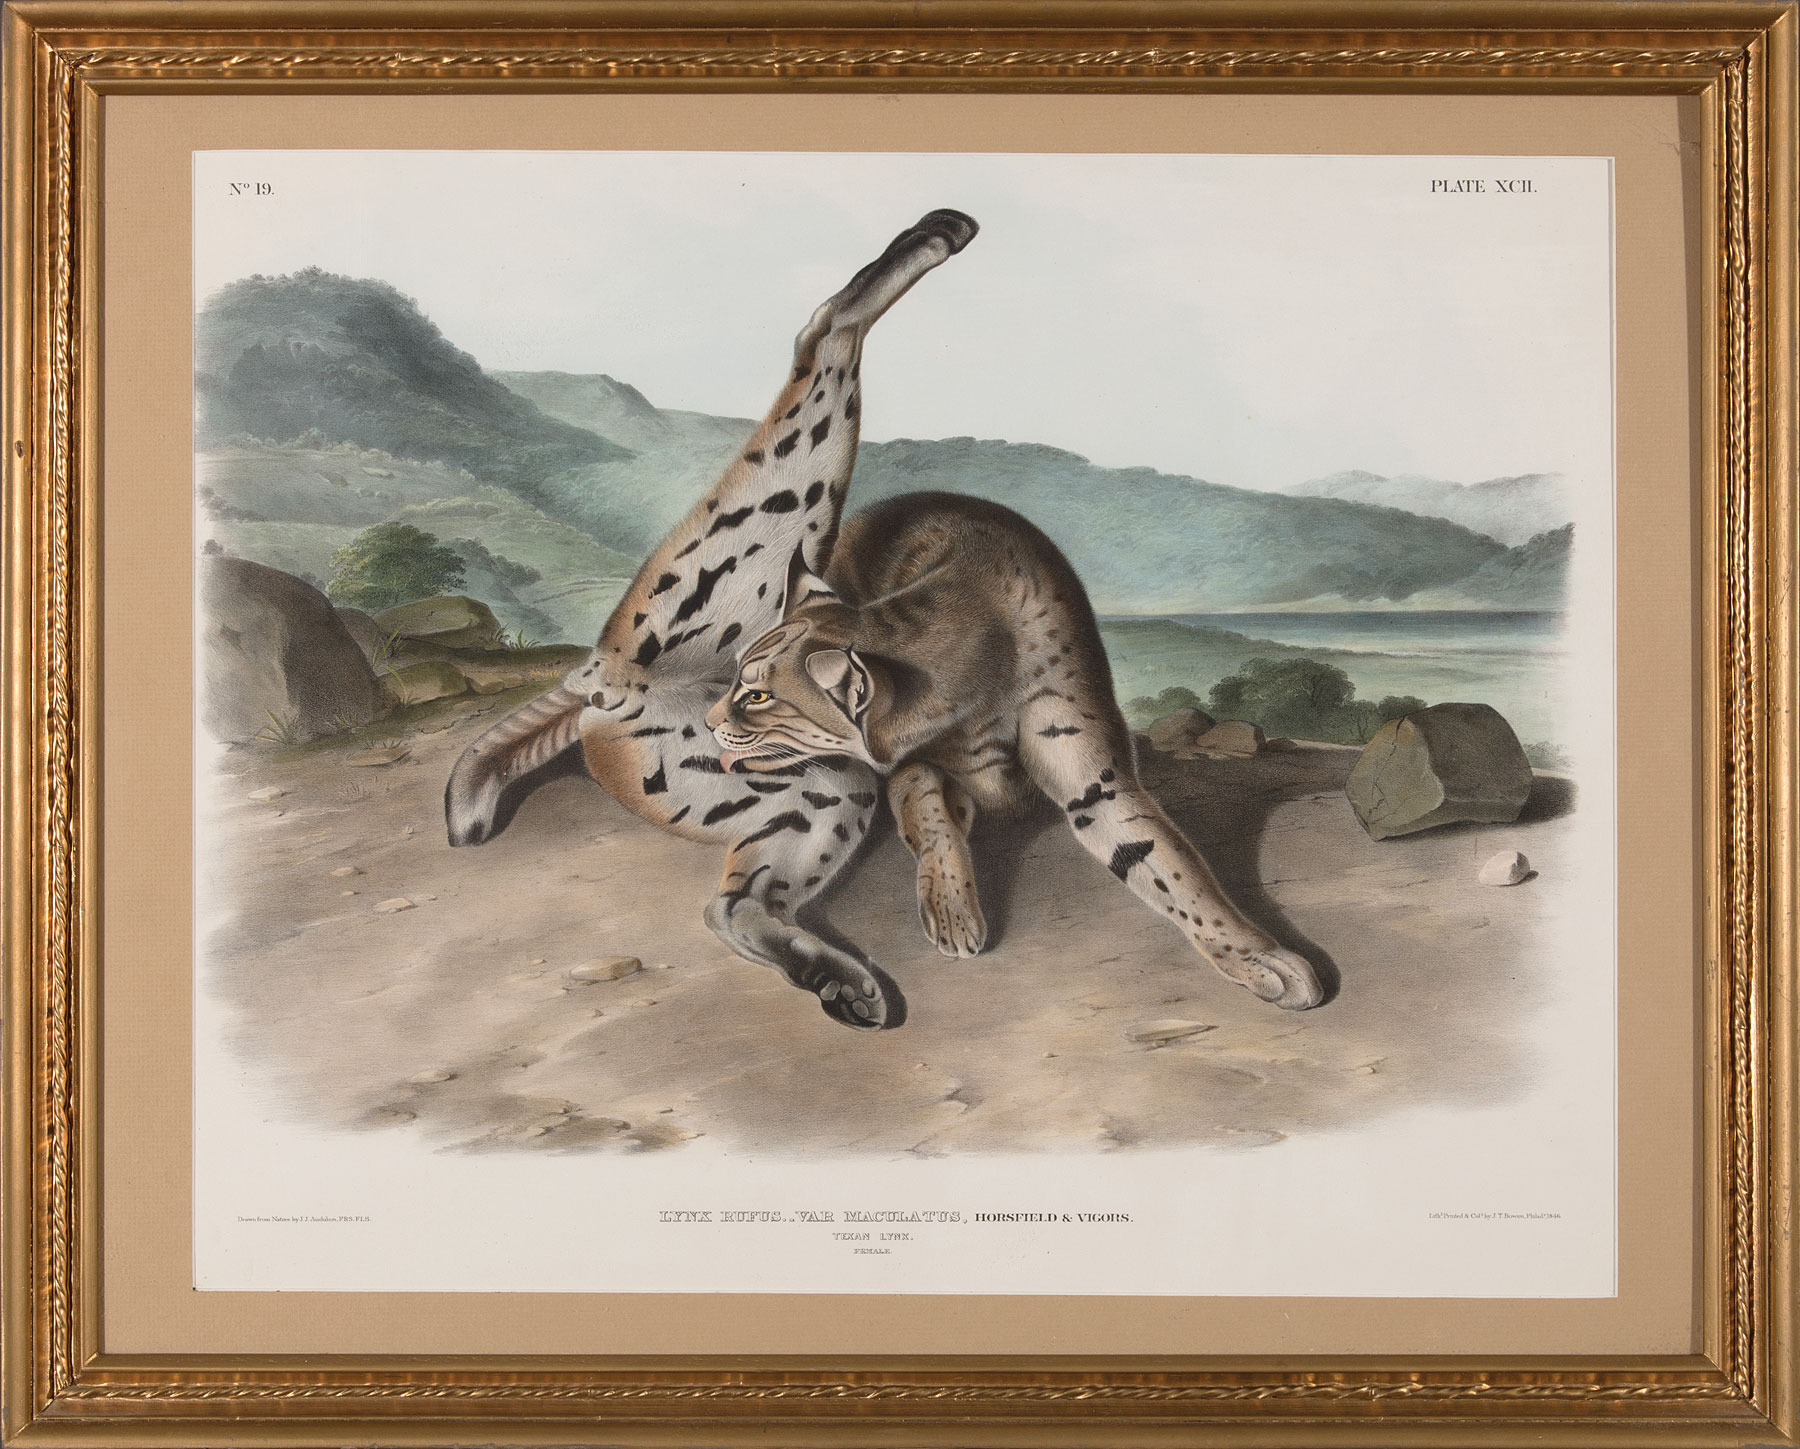 John James Audubon (American, 1785-1851) , "Texan Lynx", hand-colored lithograph, Plate 92, from The